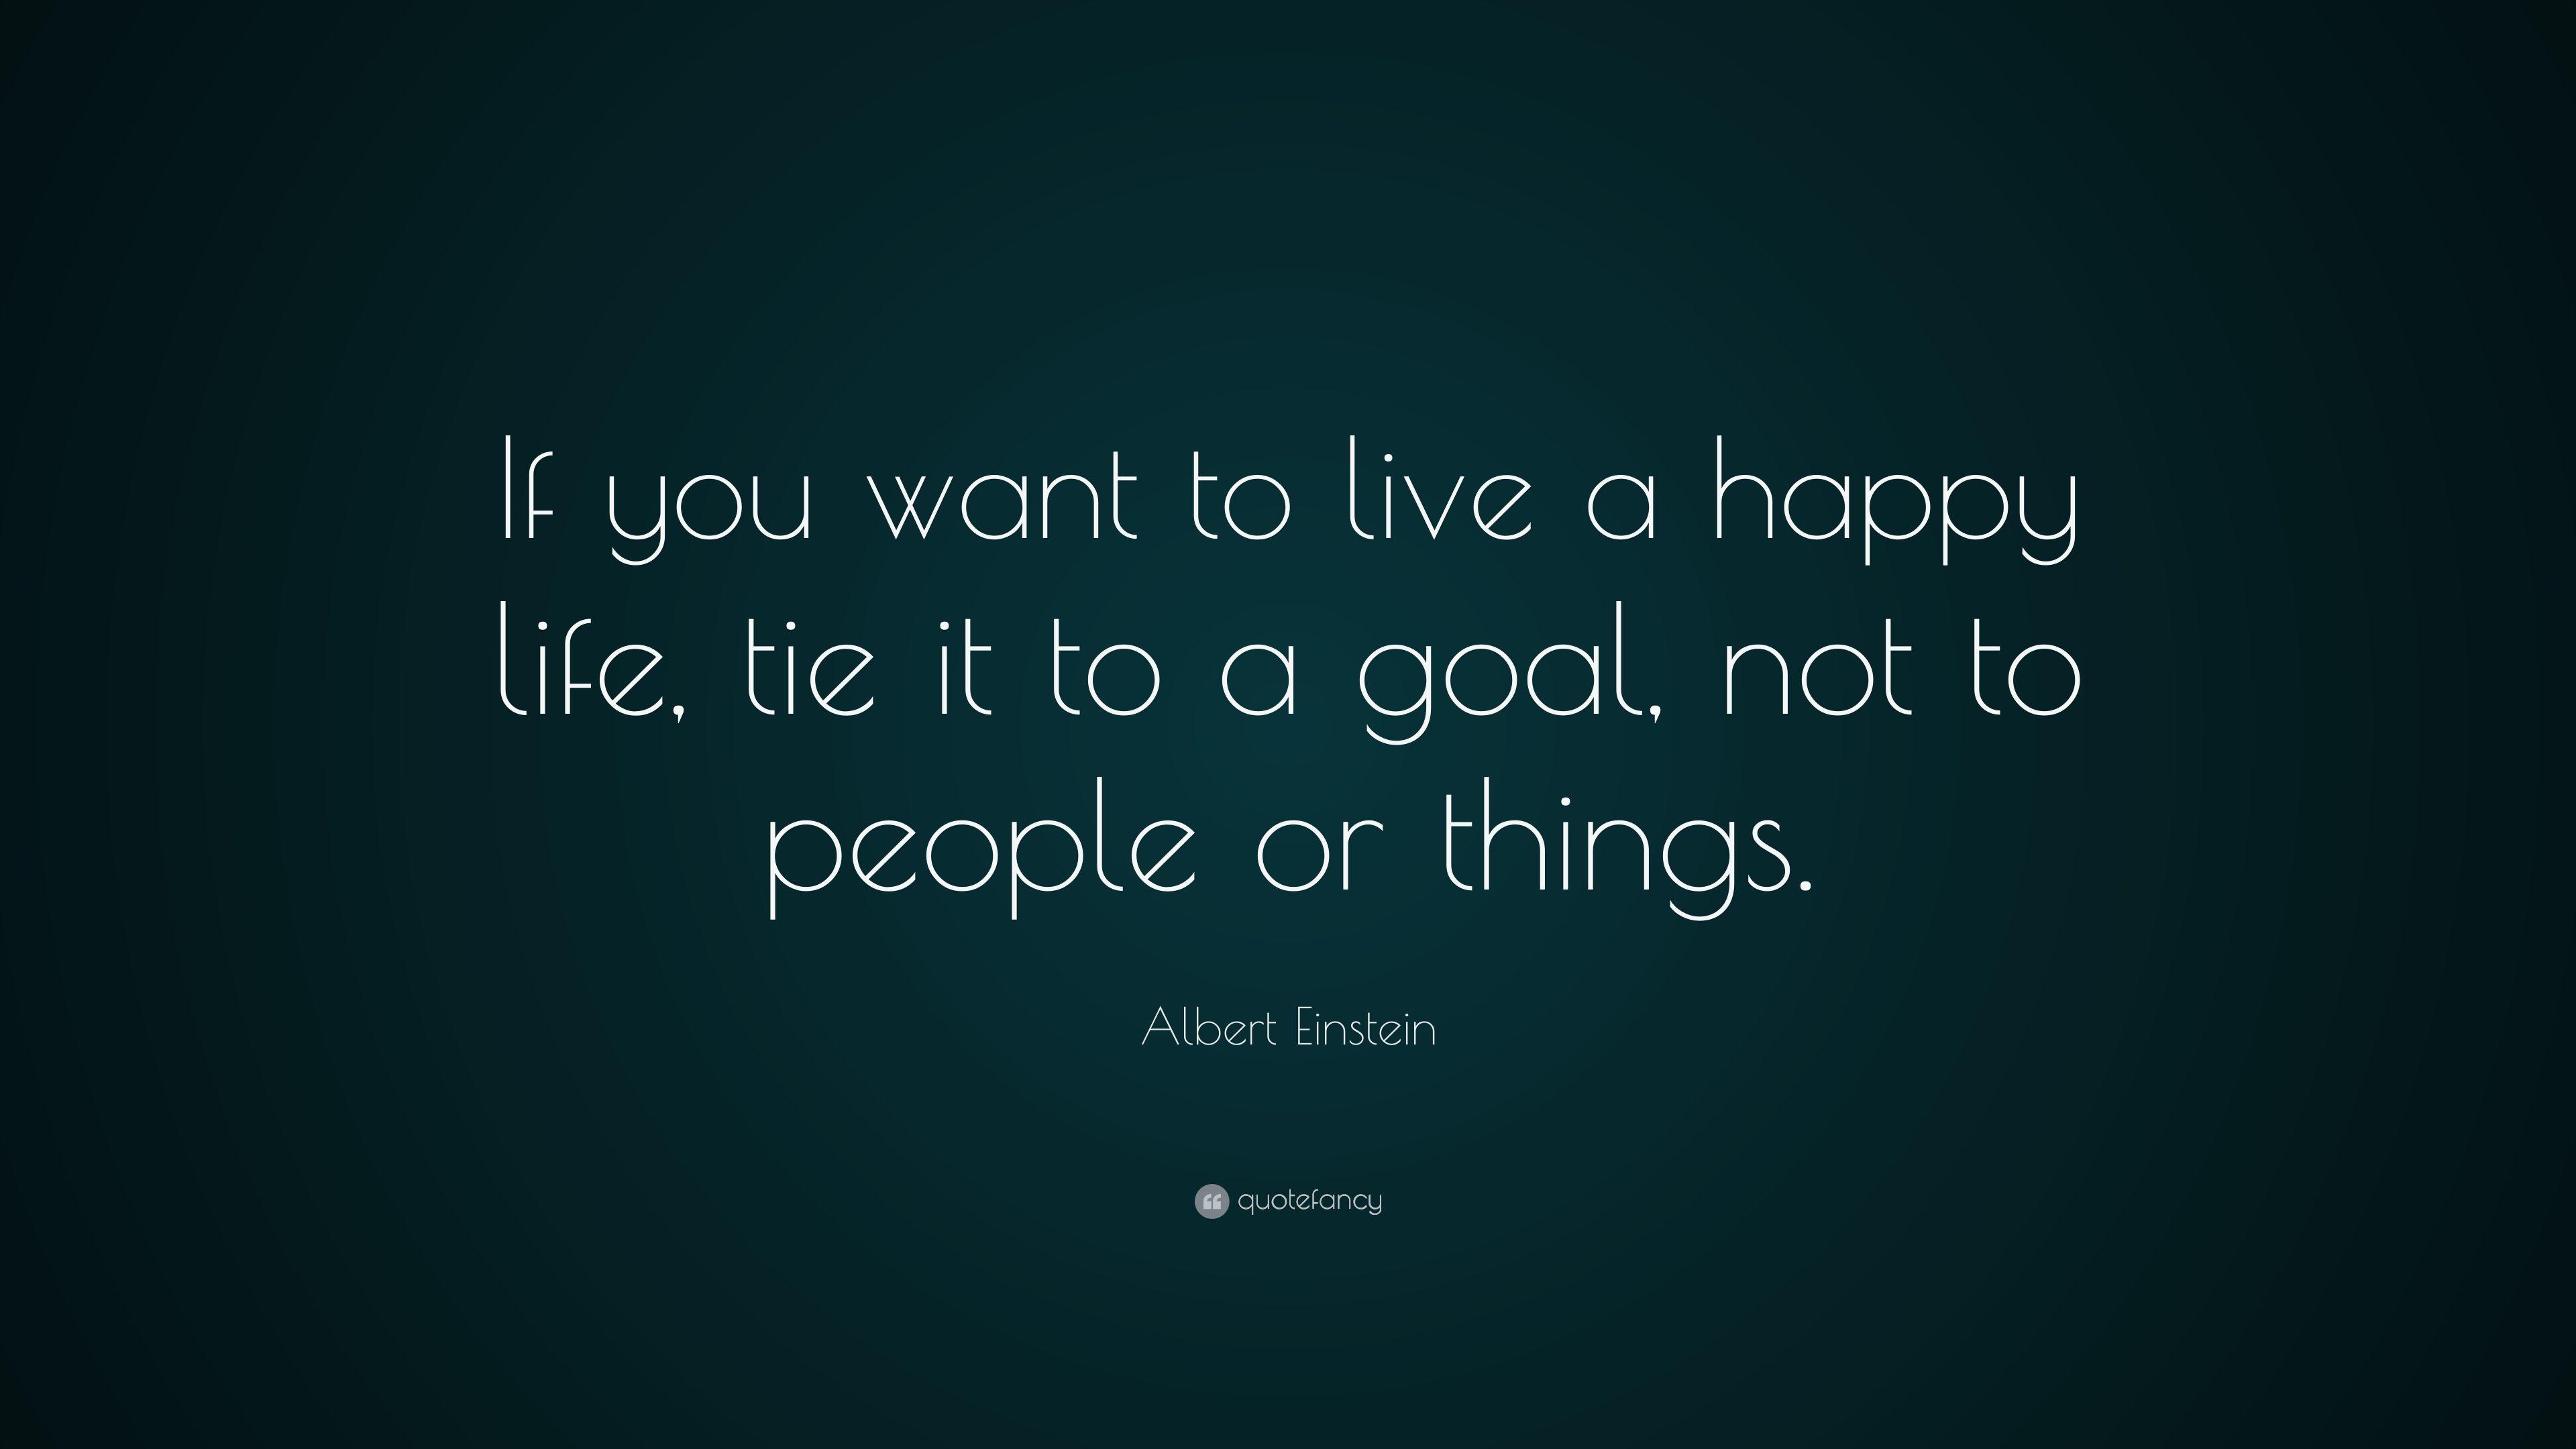 Albert Einstein Quote: “If you want to live a happy life, tie it